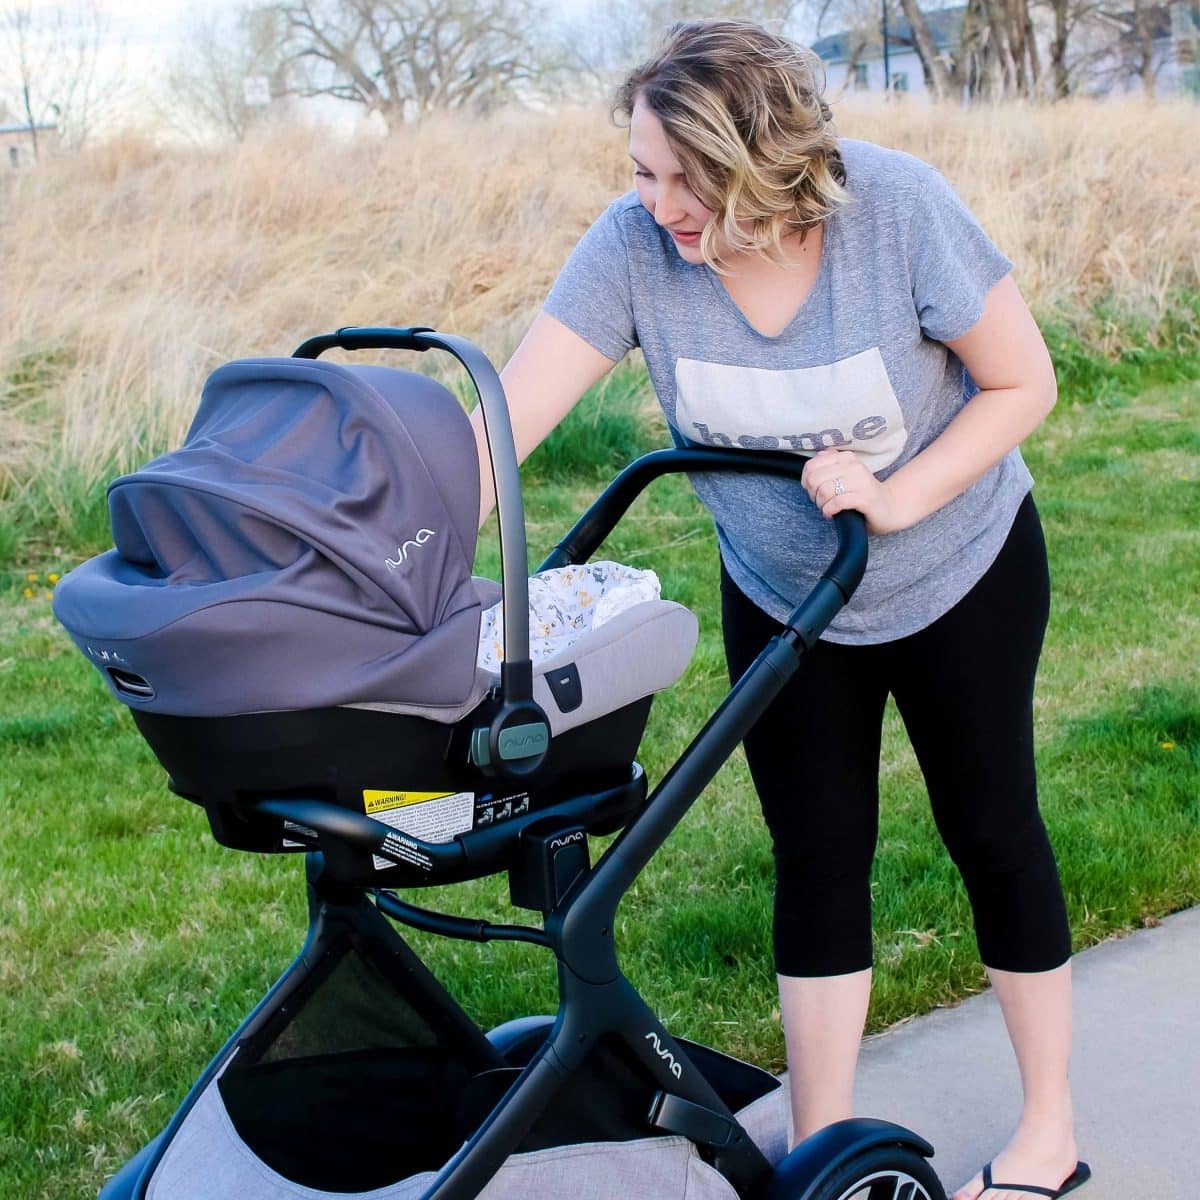 12 Products That Belong On The Best Baby Registry For Millennial Moms